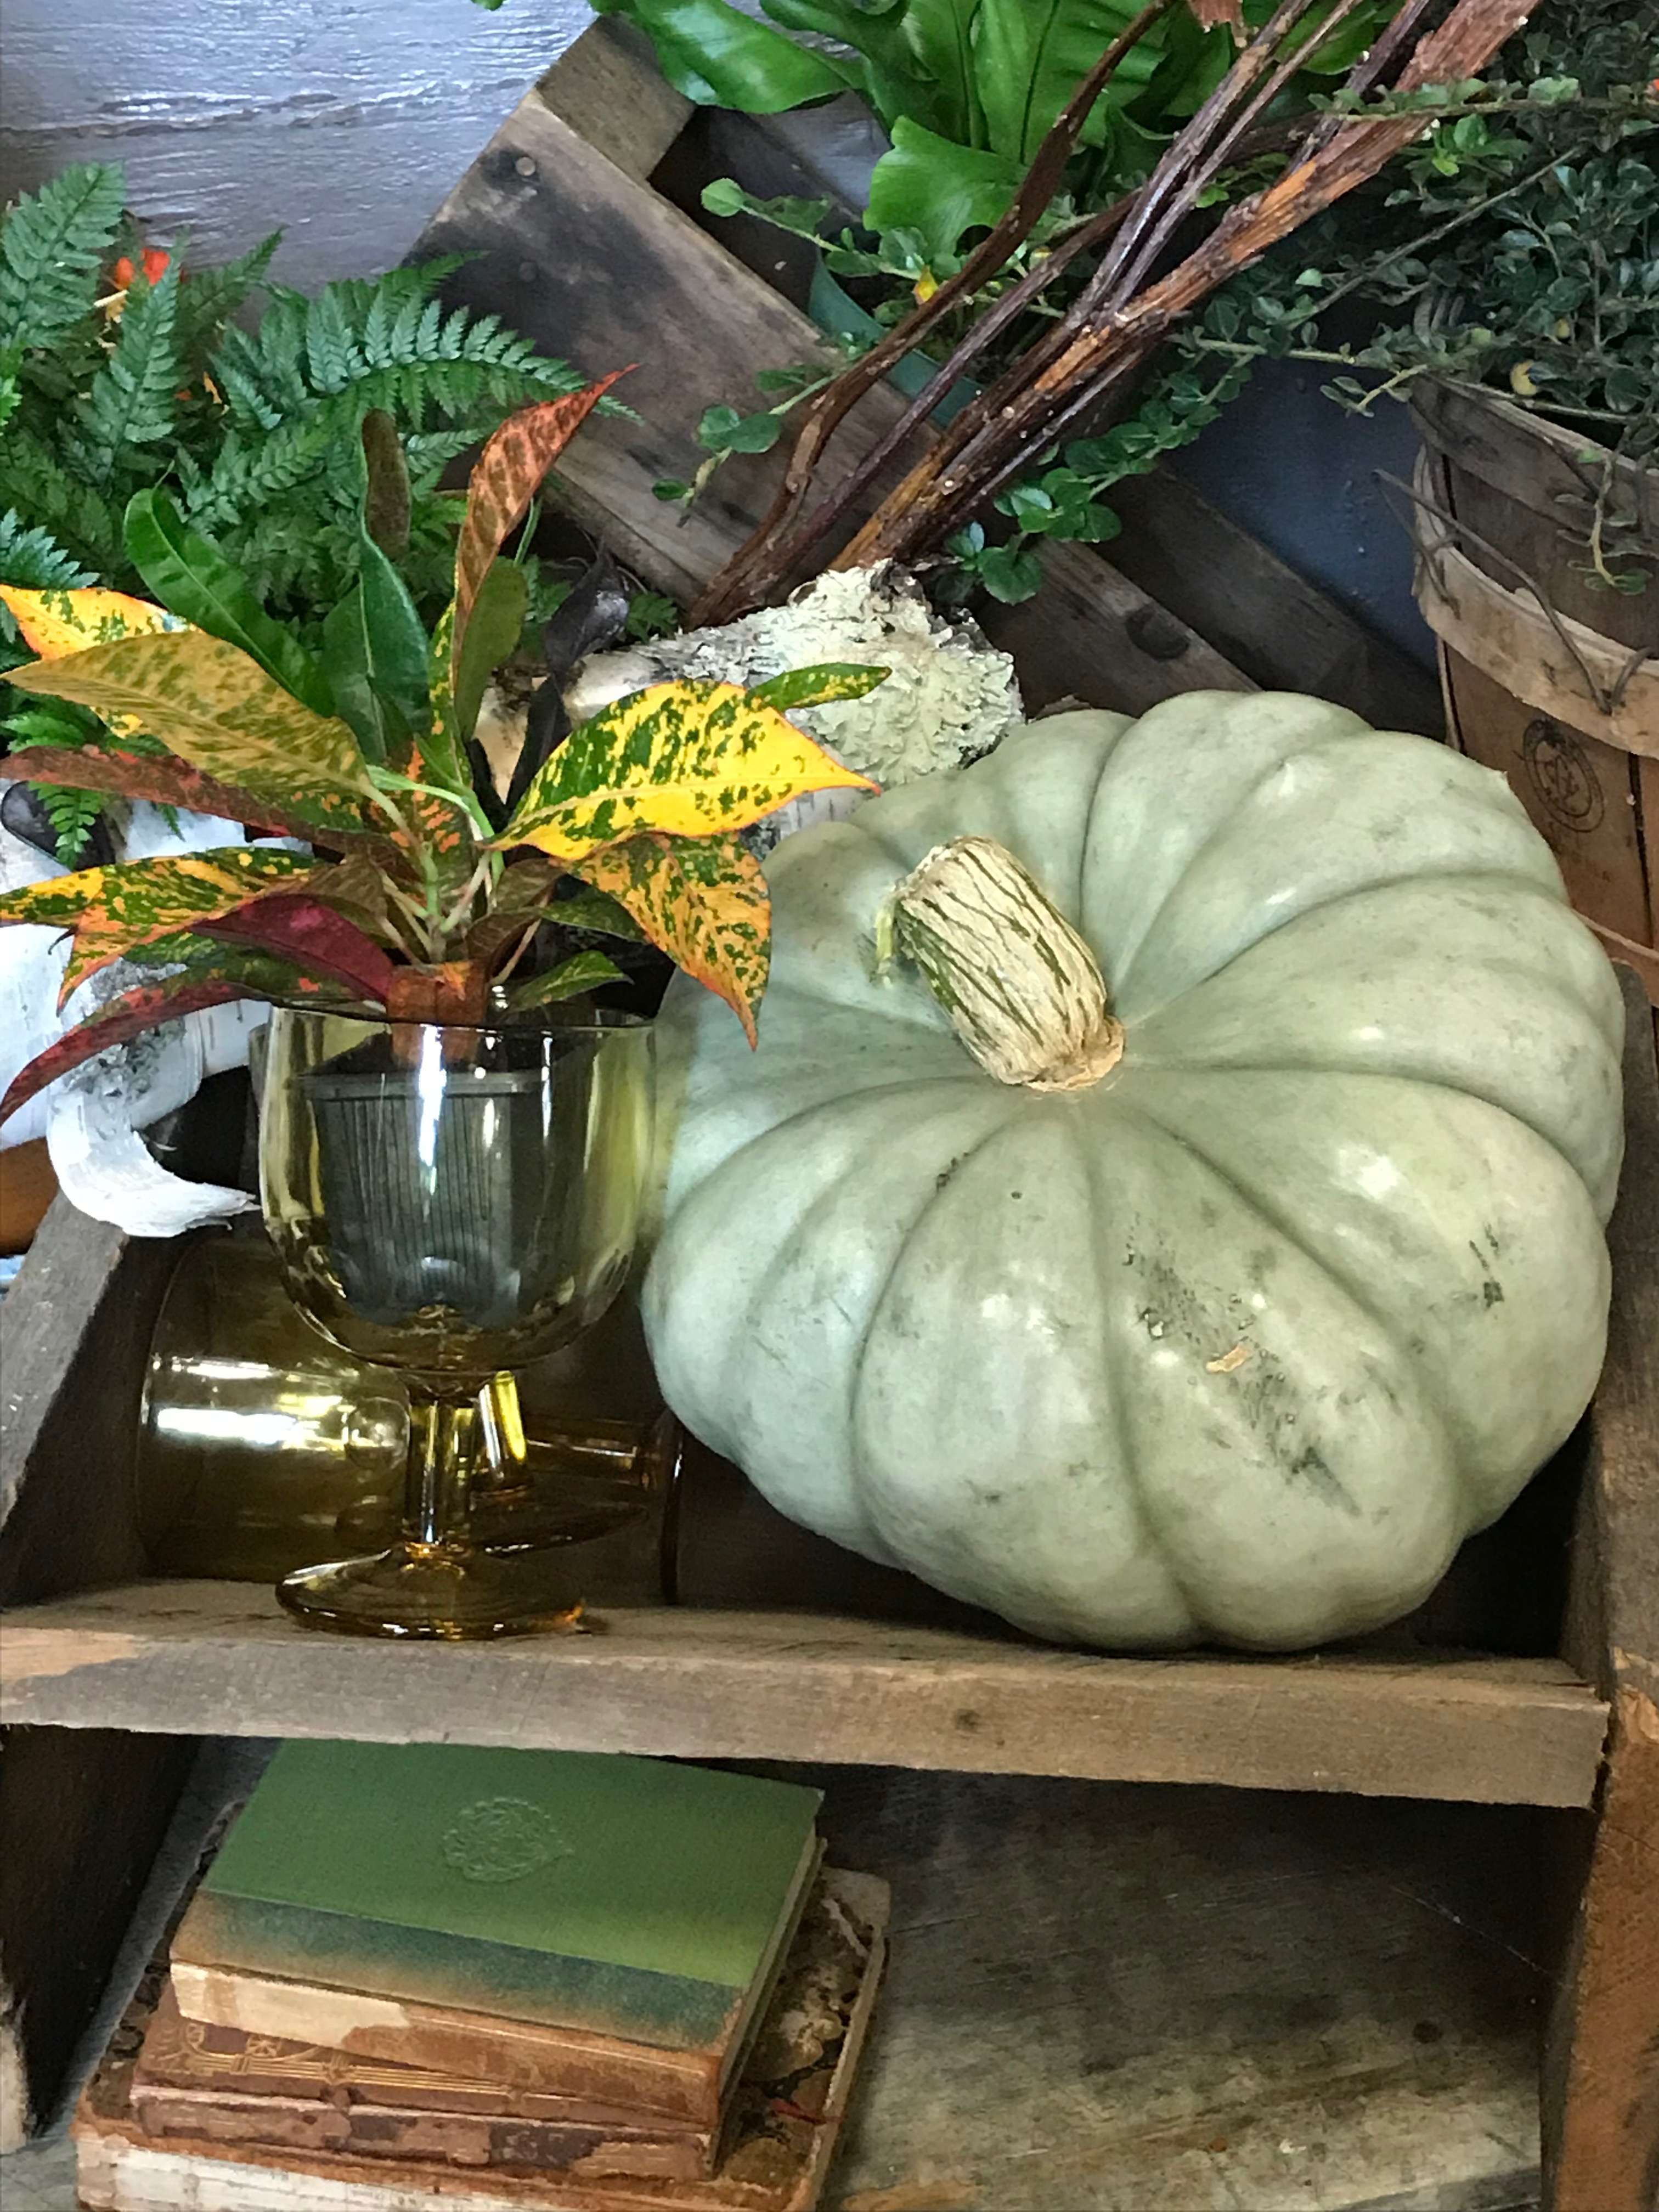 goblet used as a planter with ferns and pumpkins